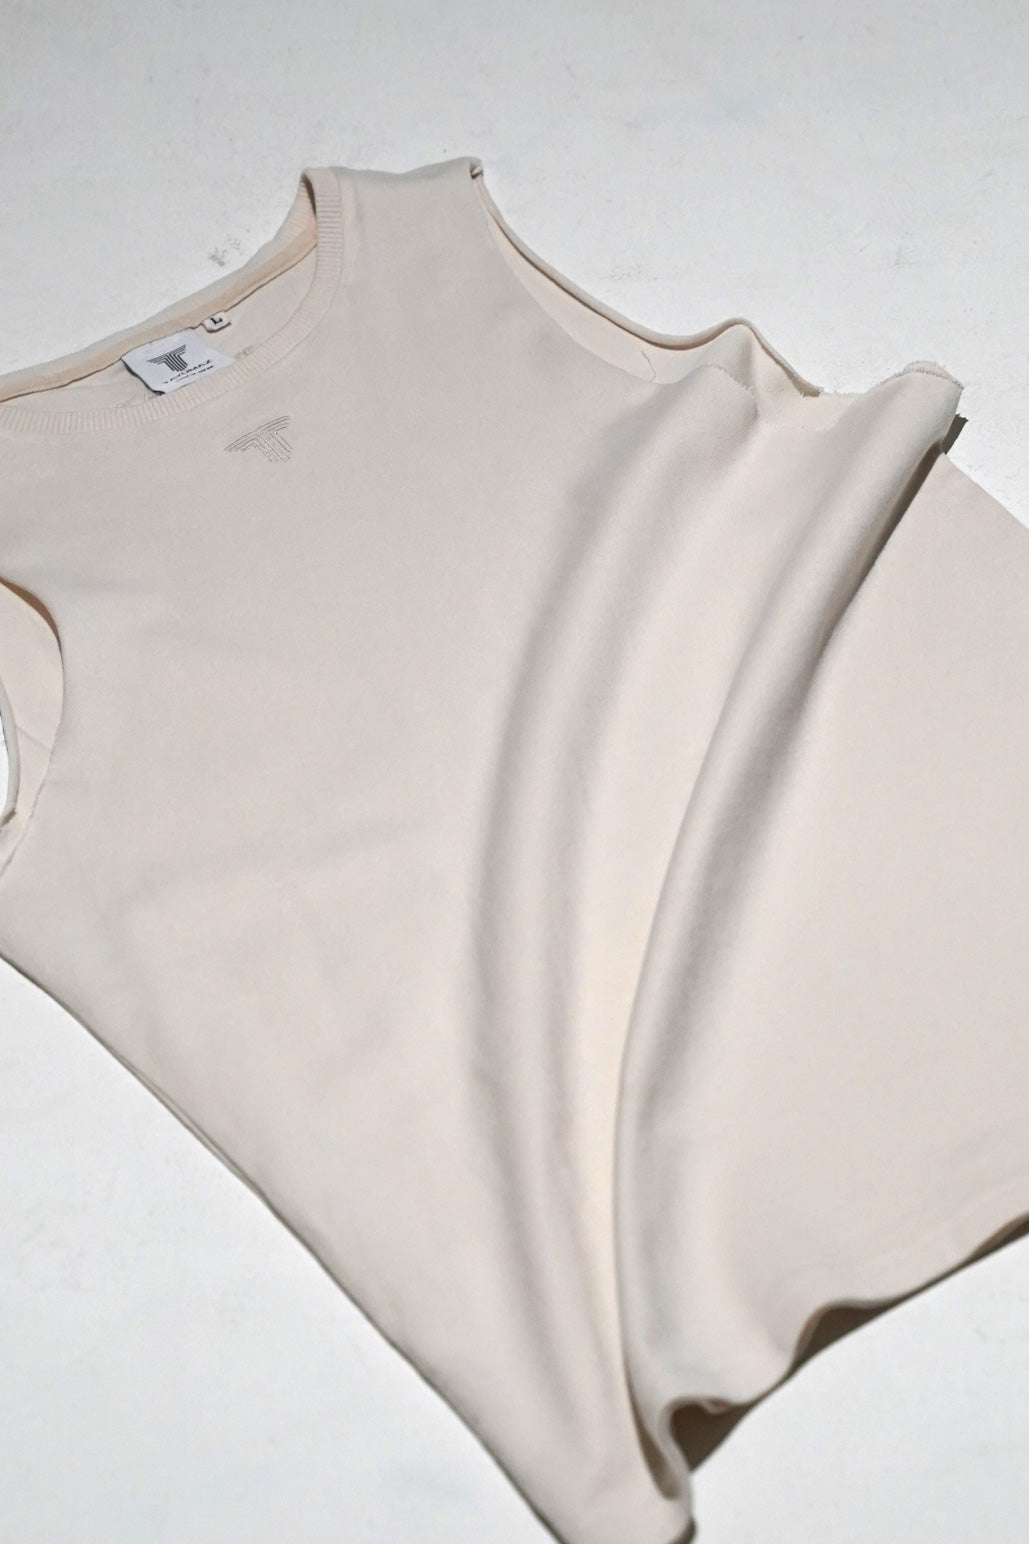 Washed cotton tank top in ivory white